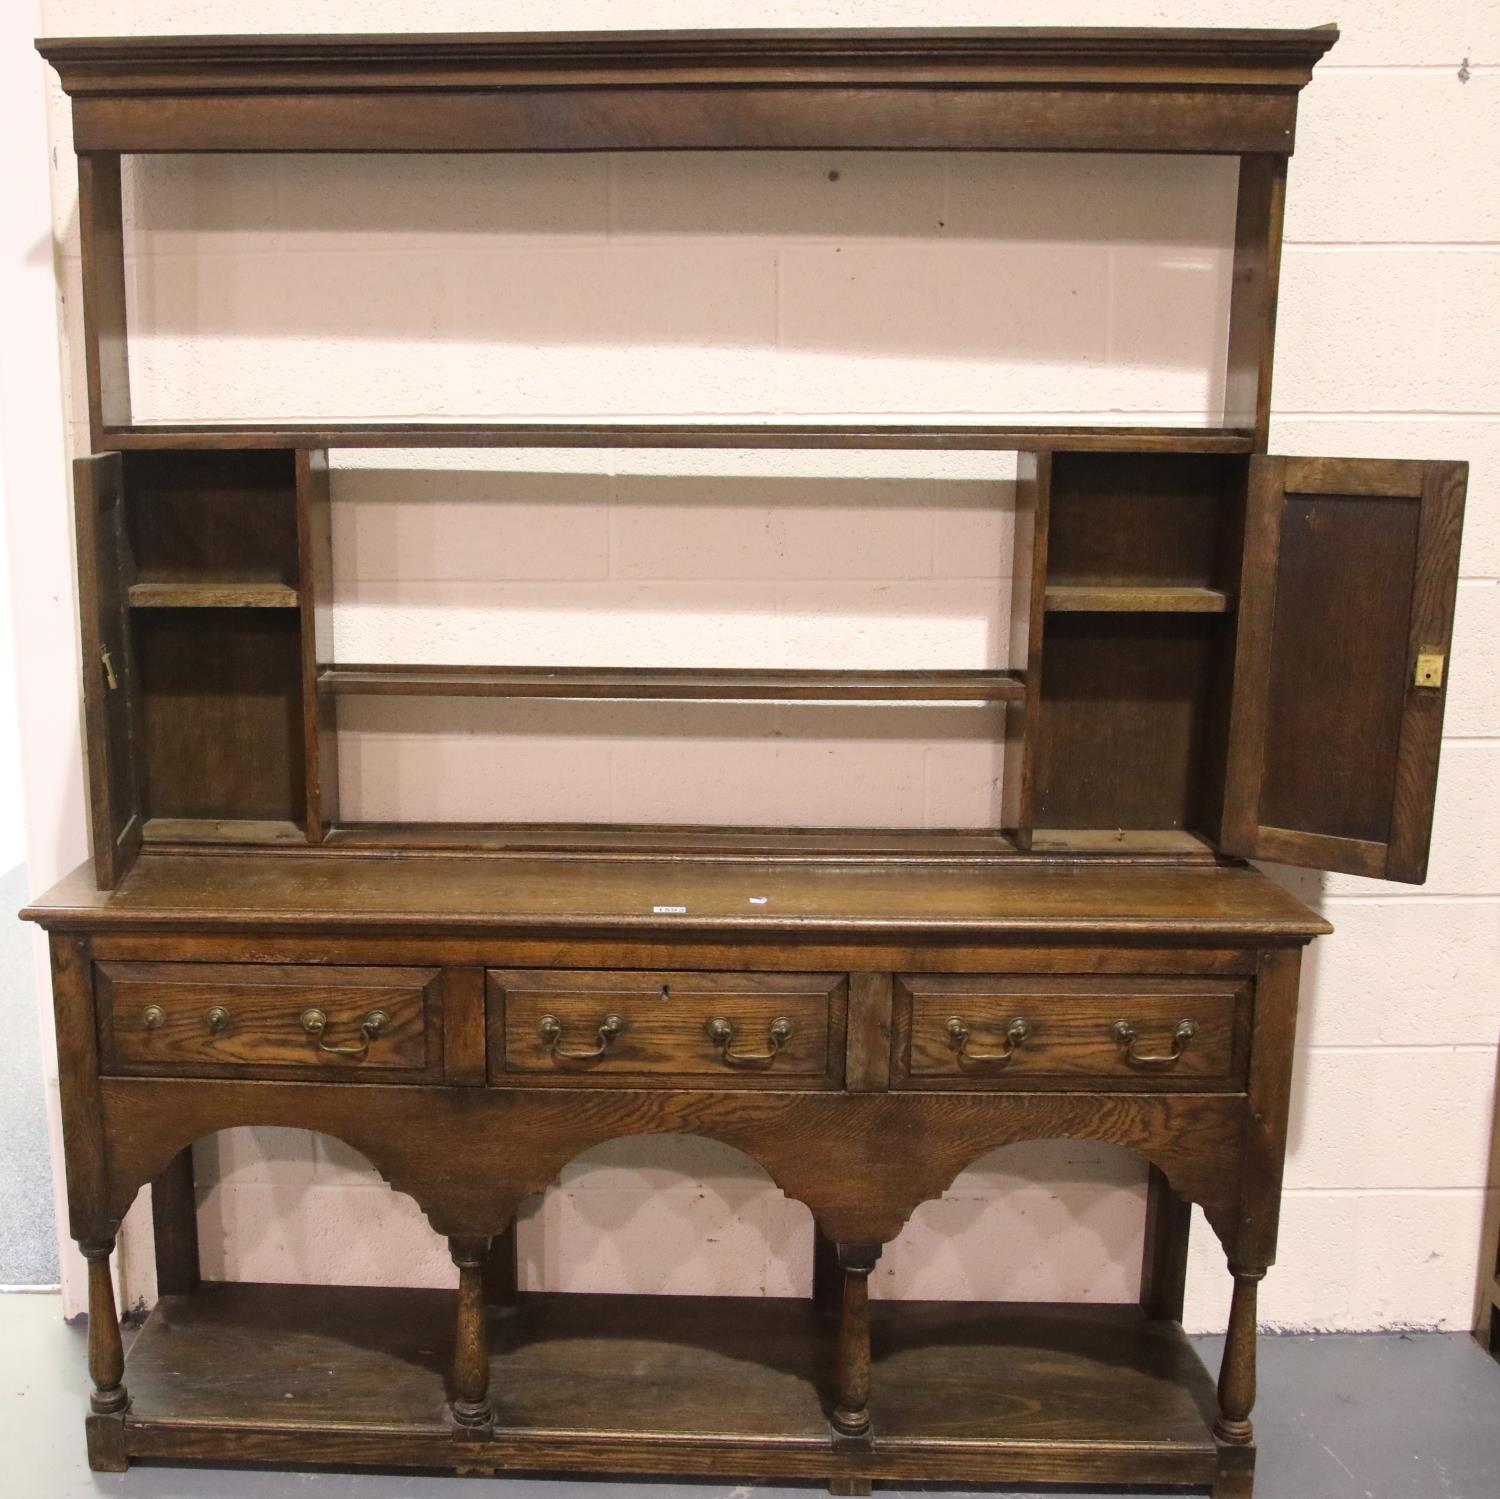 Oak three drawer dresser with cupboards and plate rack above, possibly Victorian, 160 x 39 x 185 cm.